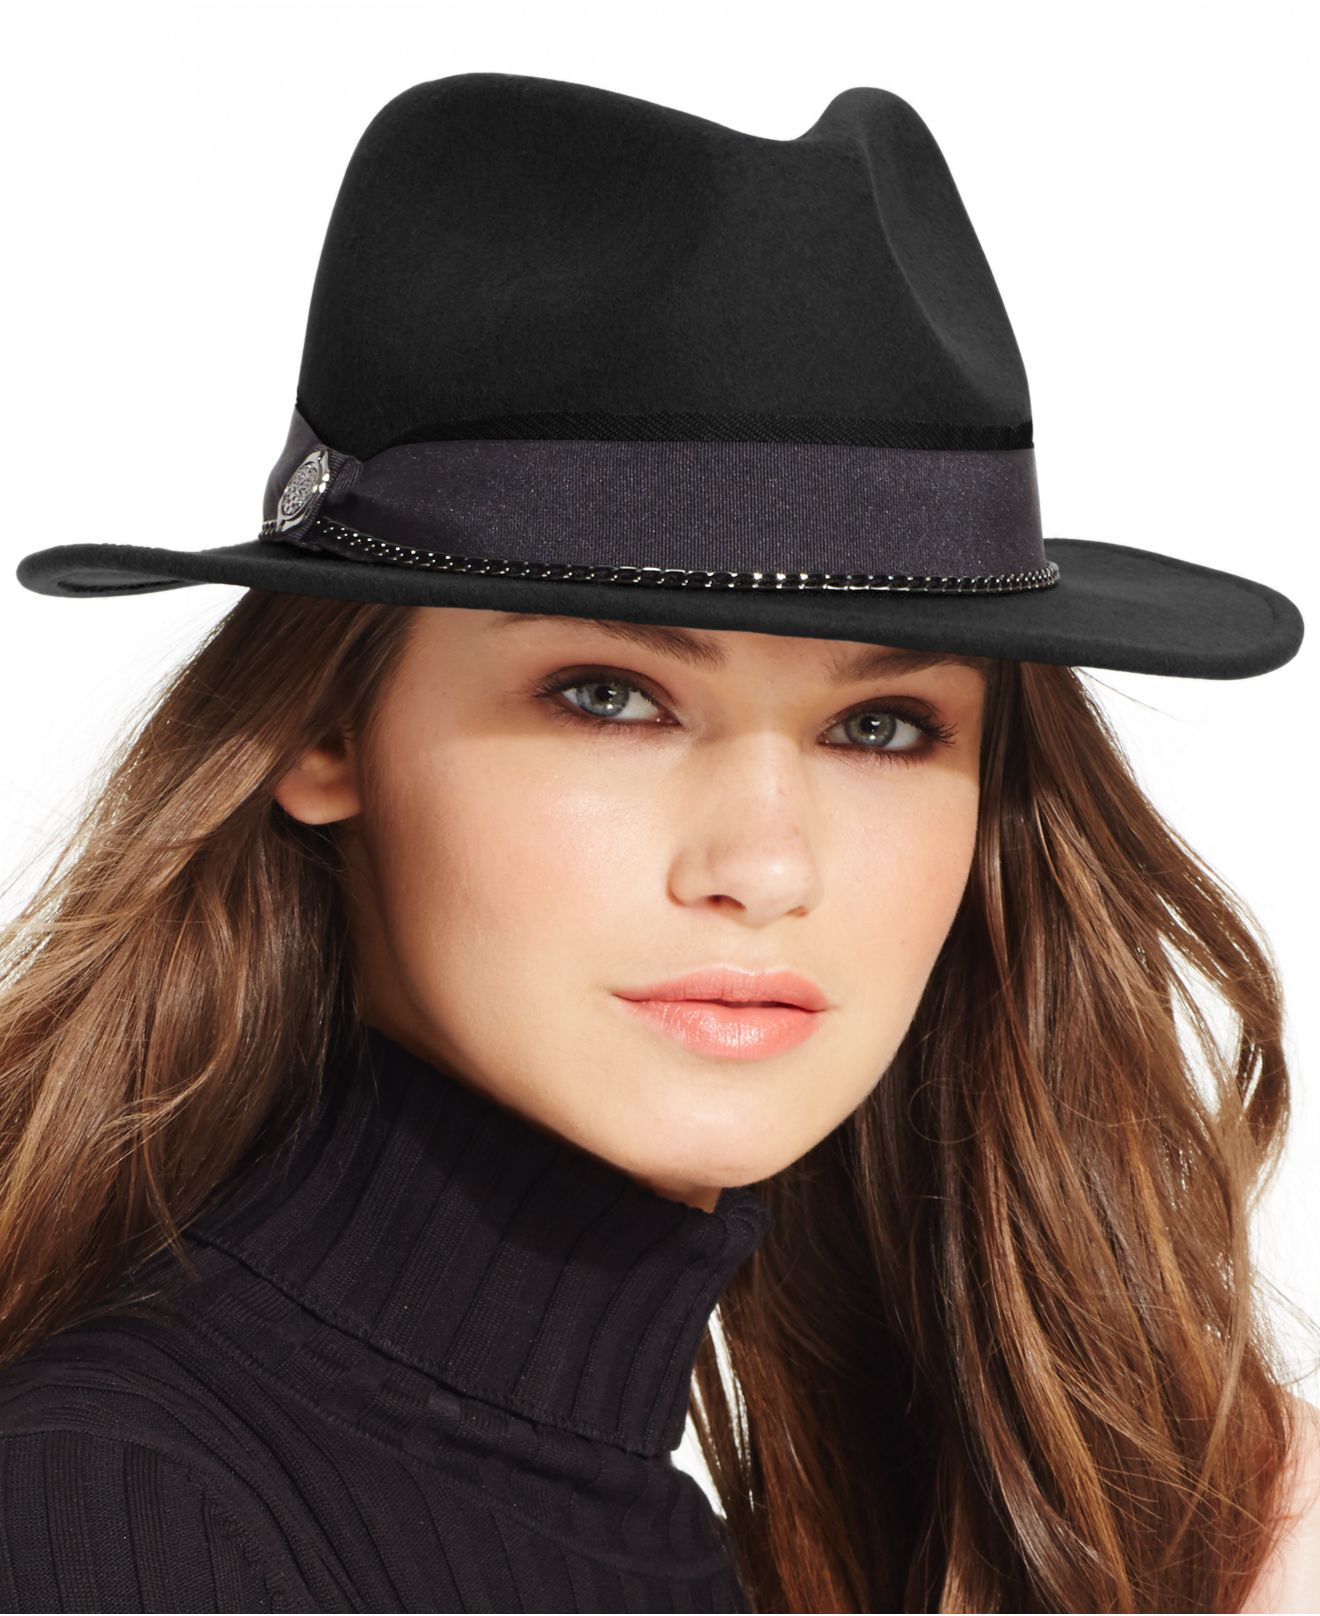 Lyst - Vince Camuto Chained Panama Hat in Black